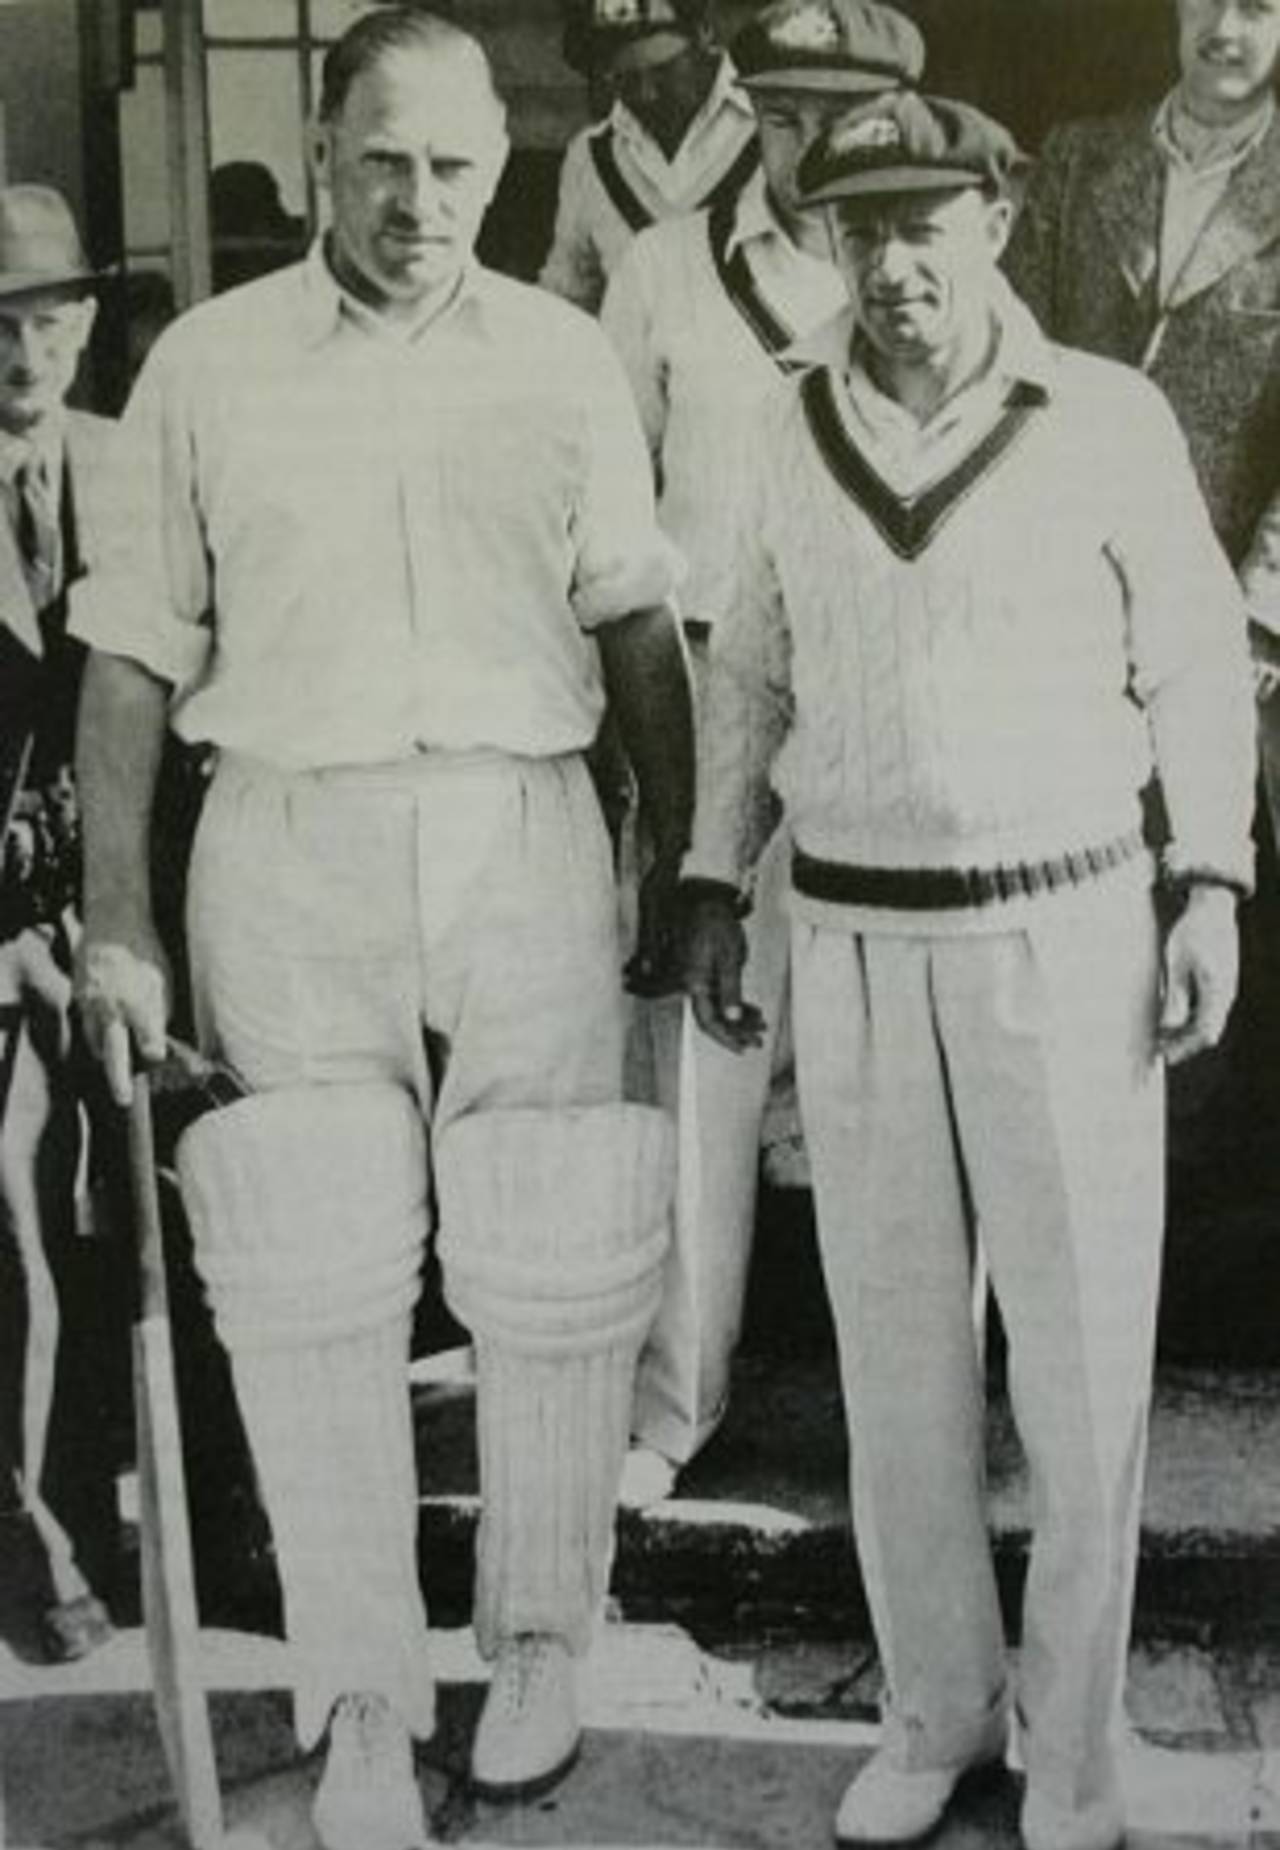 Essex captain Tom Pearce and Don Bradman pose ahead of the second day at Southend. On the first day Australia had scored 721, Essex v Australians, Southend, May 17, 1948